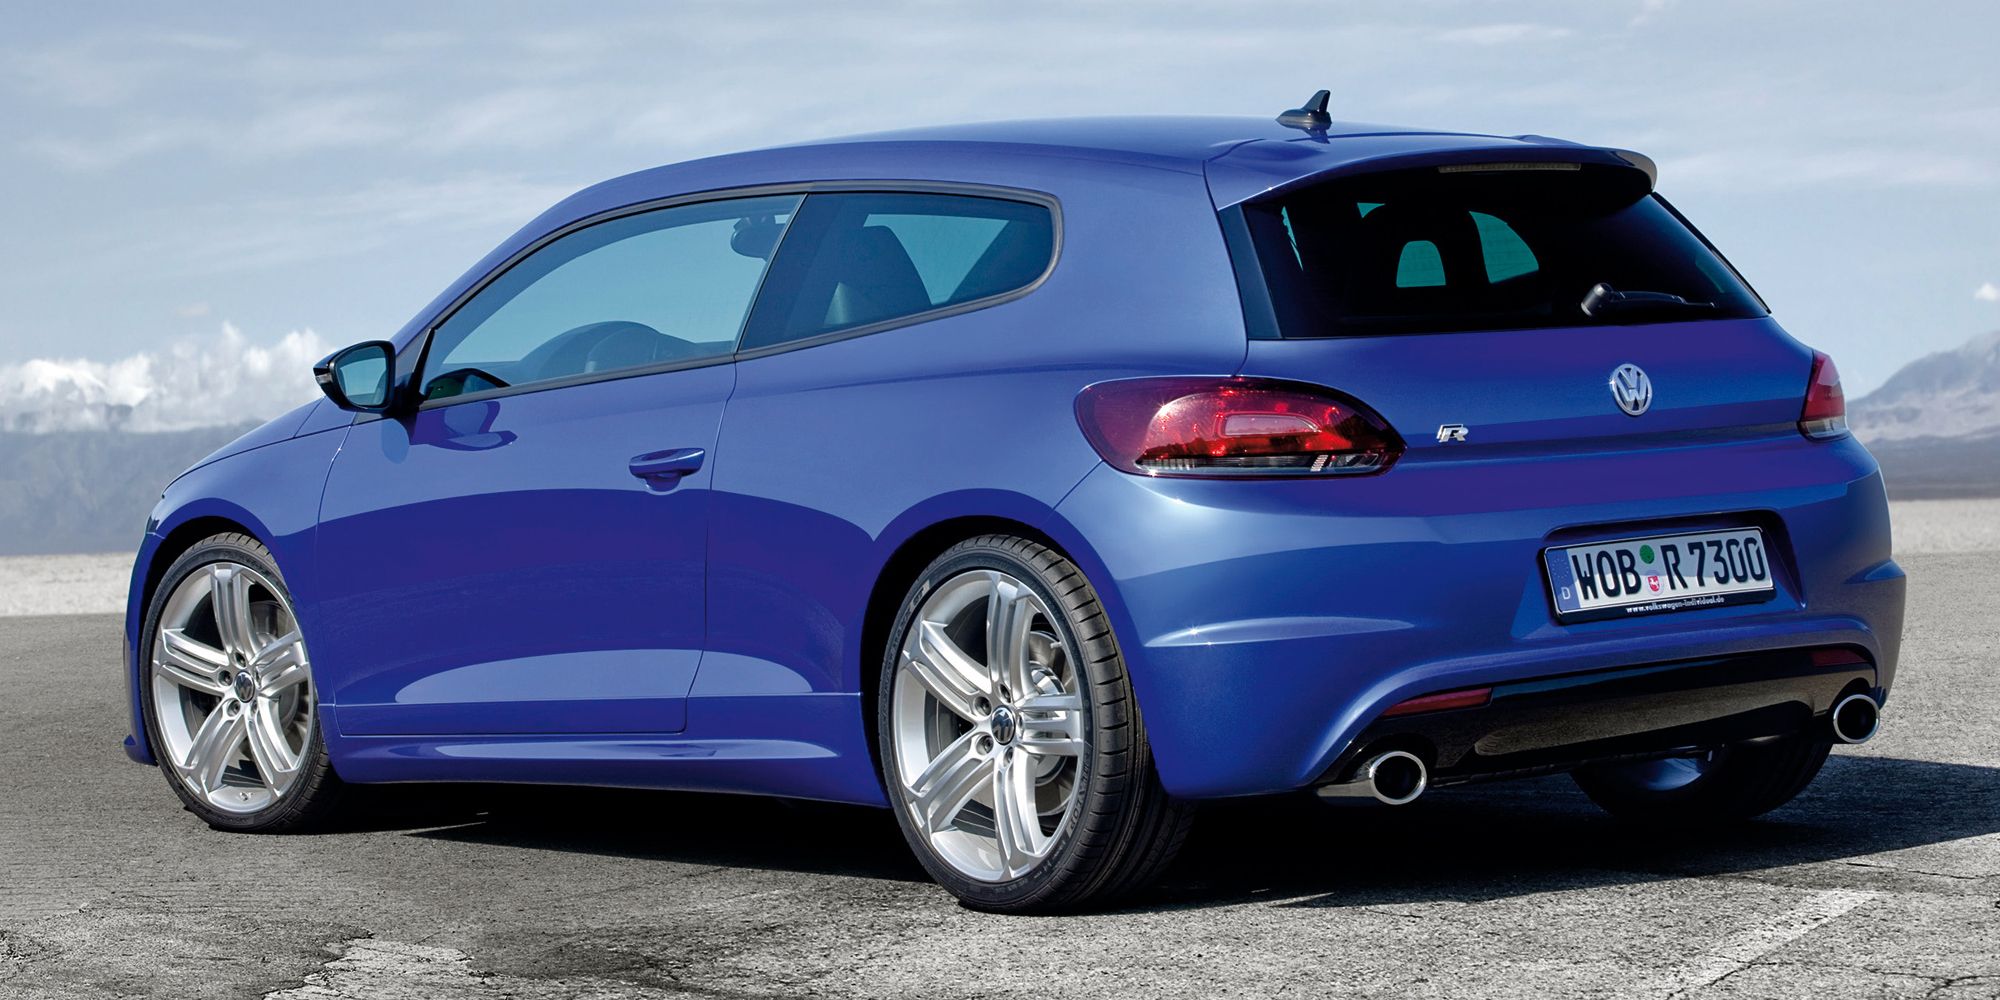 Rear 3/4 view of the Scirocco R